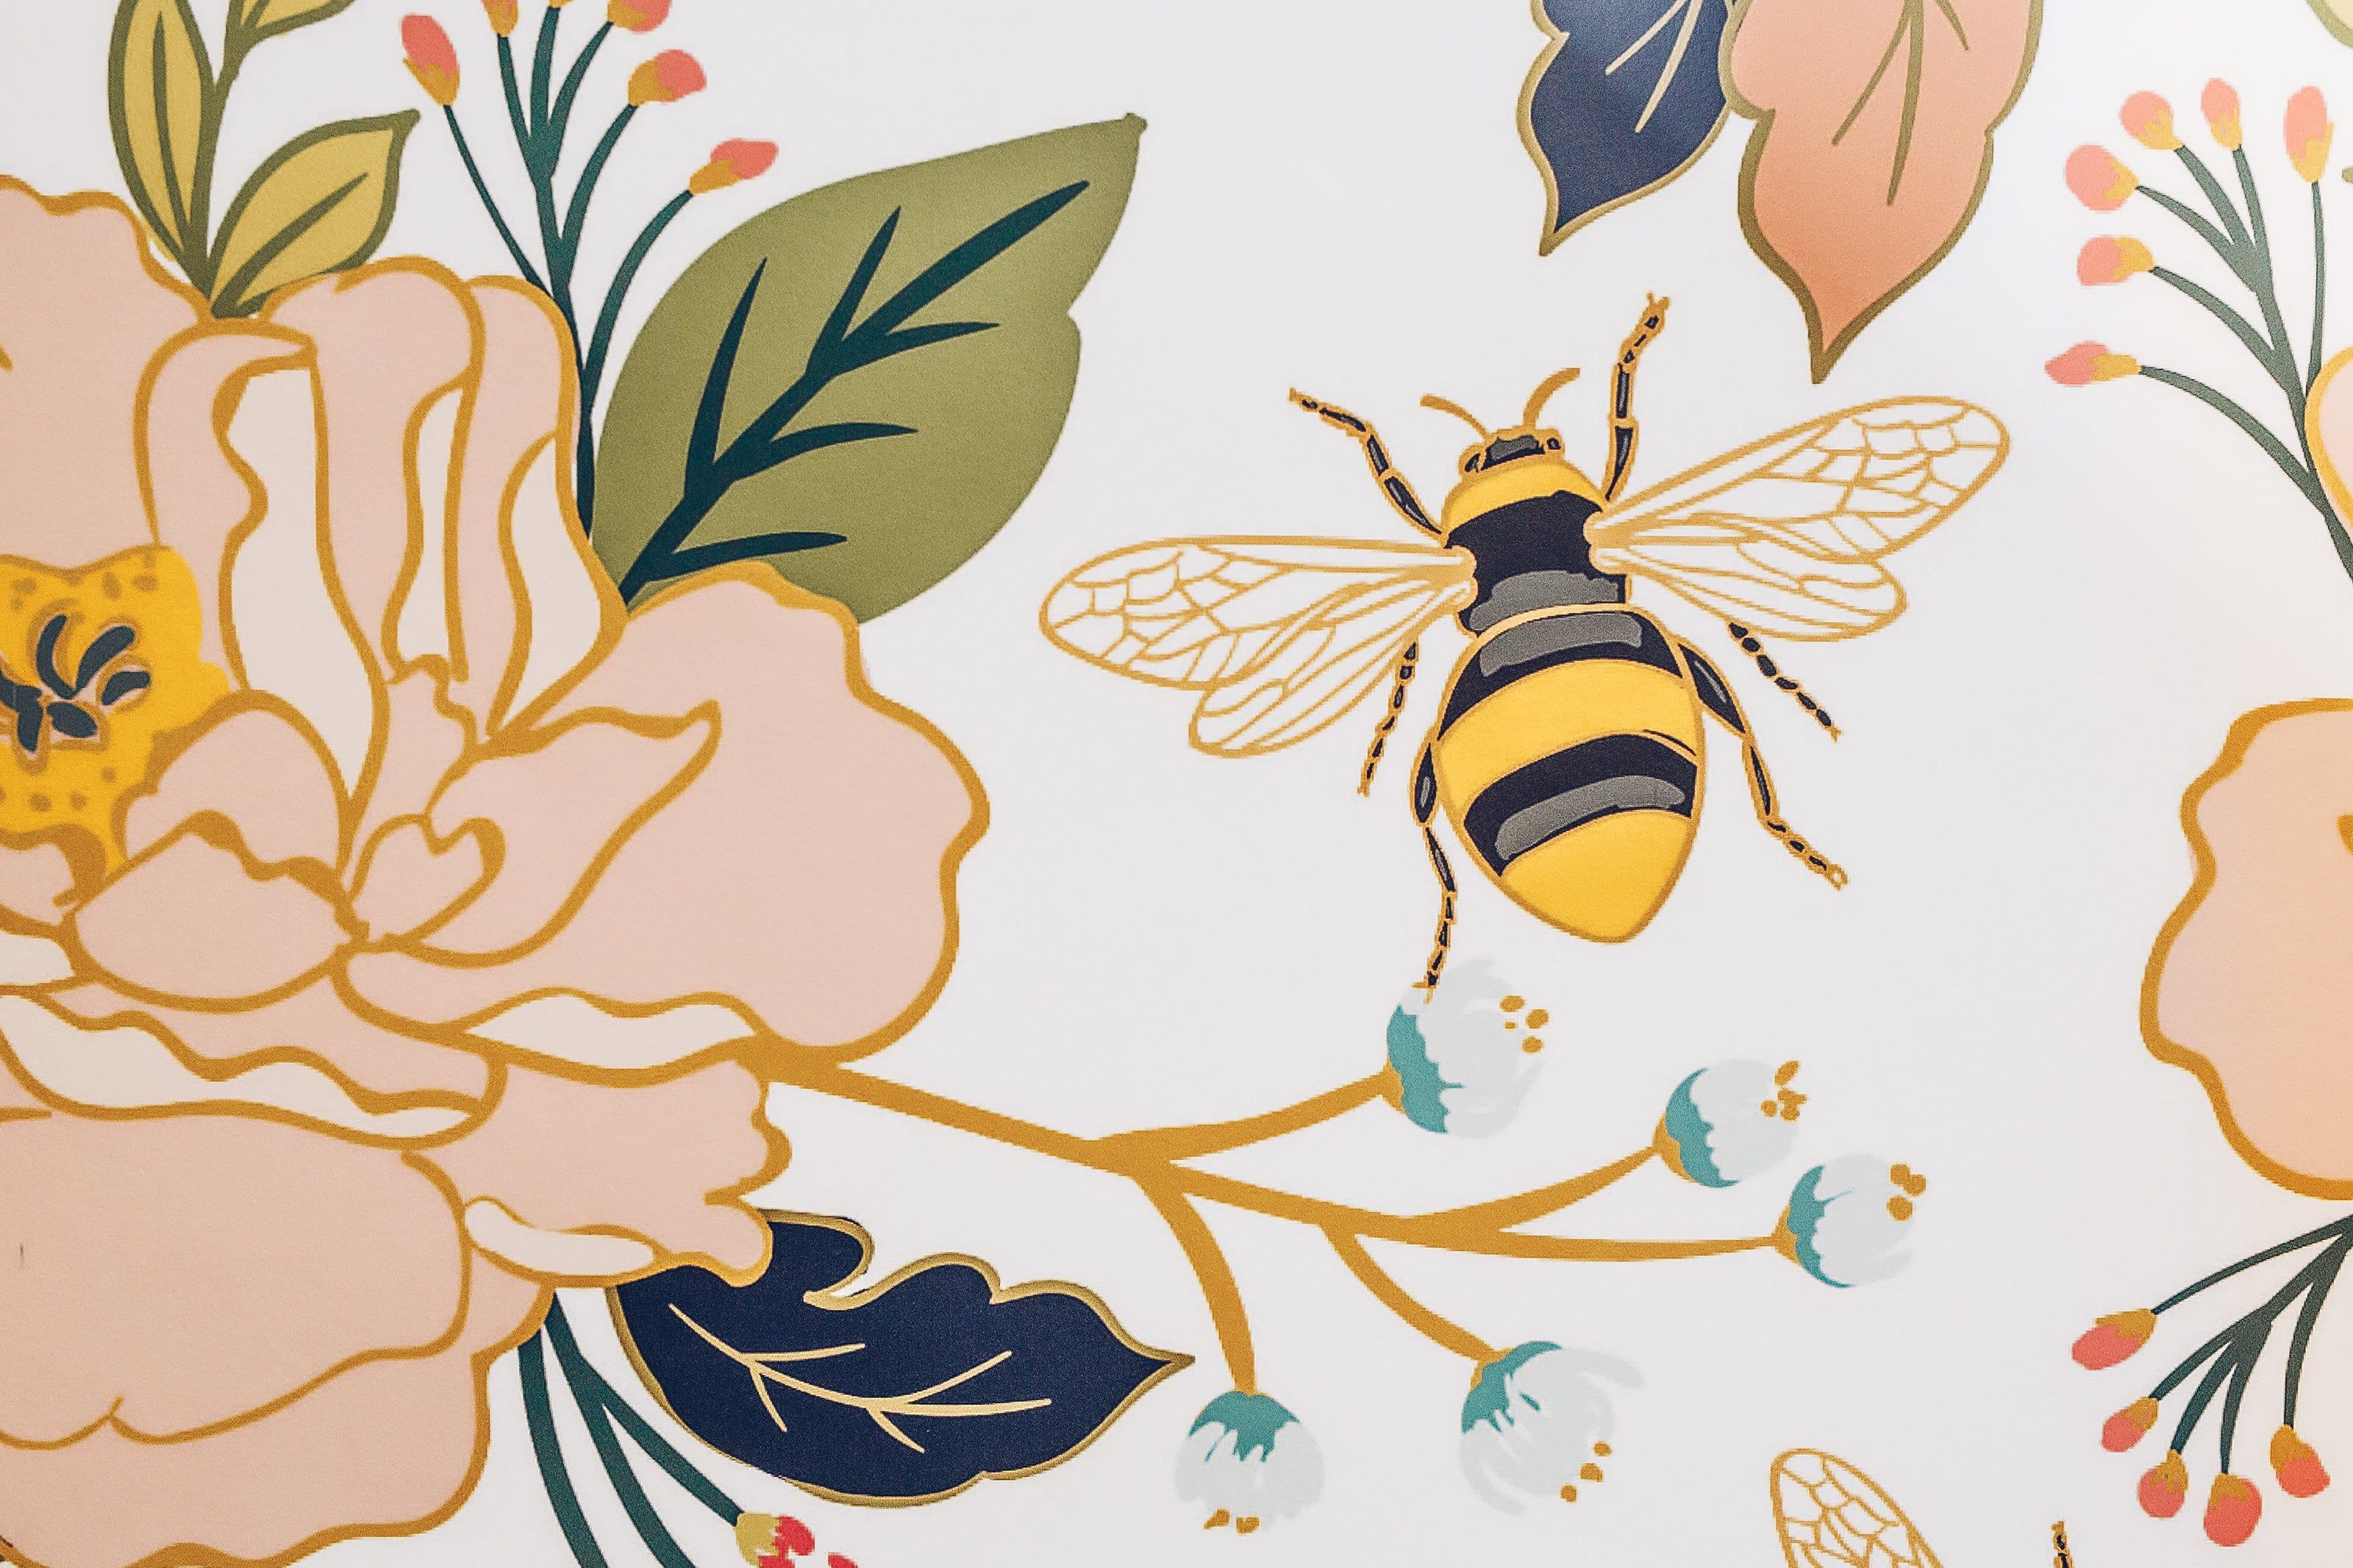 A close up of some flowers and bees - Bee, honey